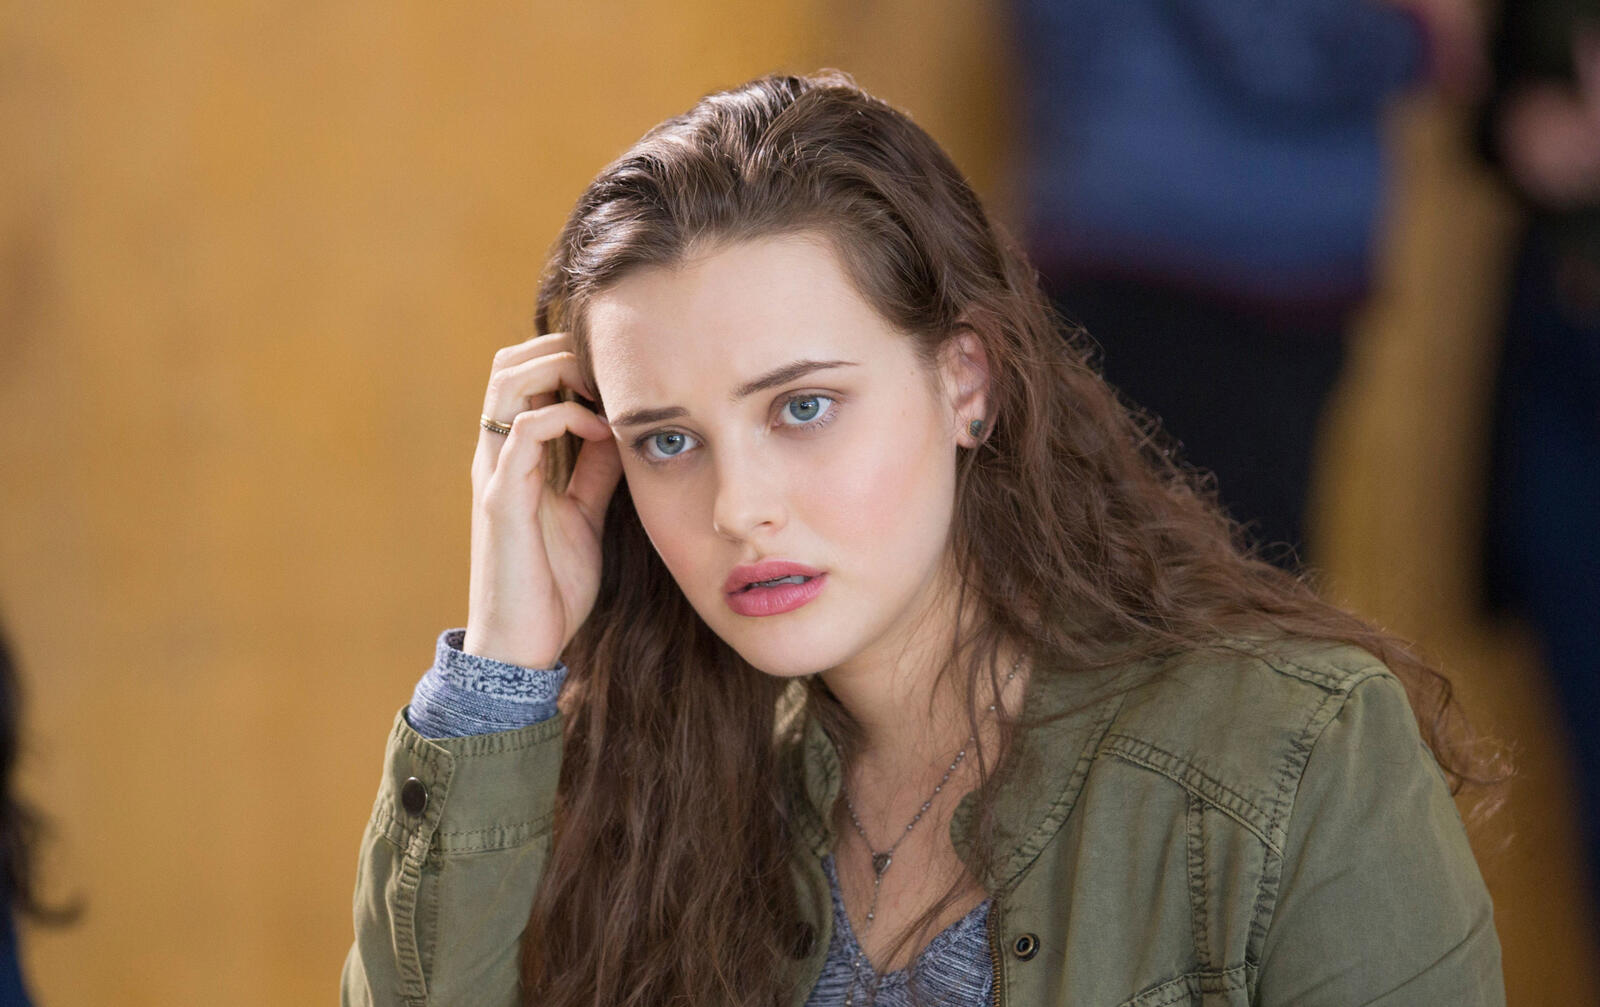 Wallpapers actress 13 Reasons Why Katherine Langford on the desktop